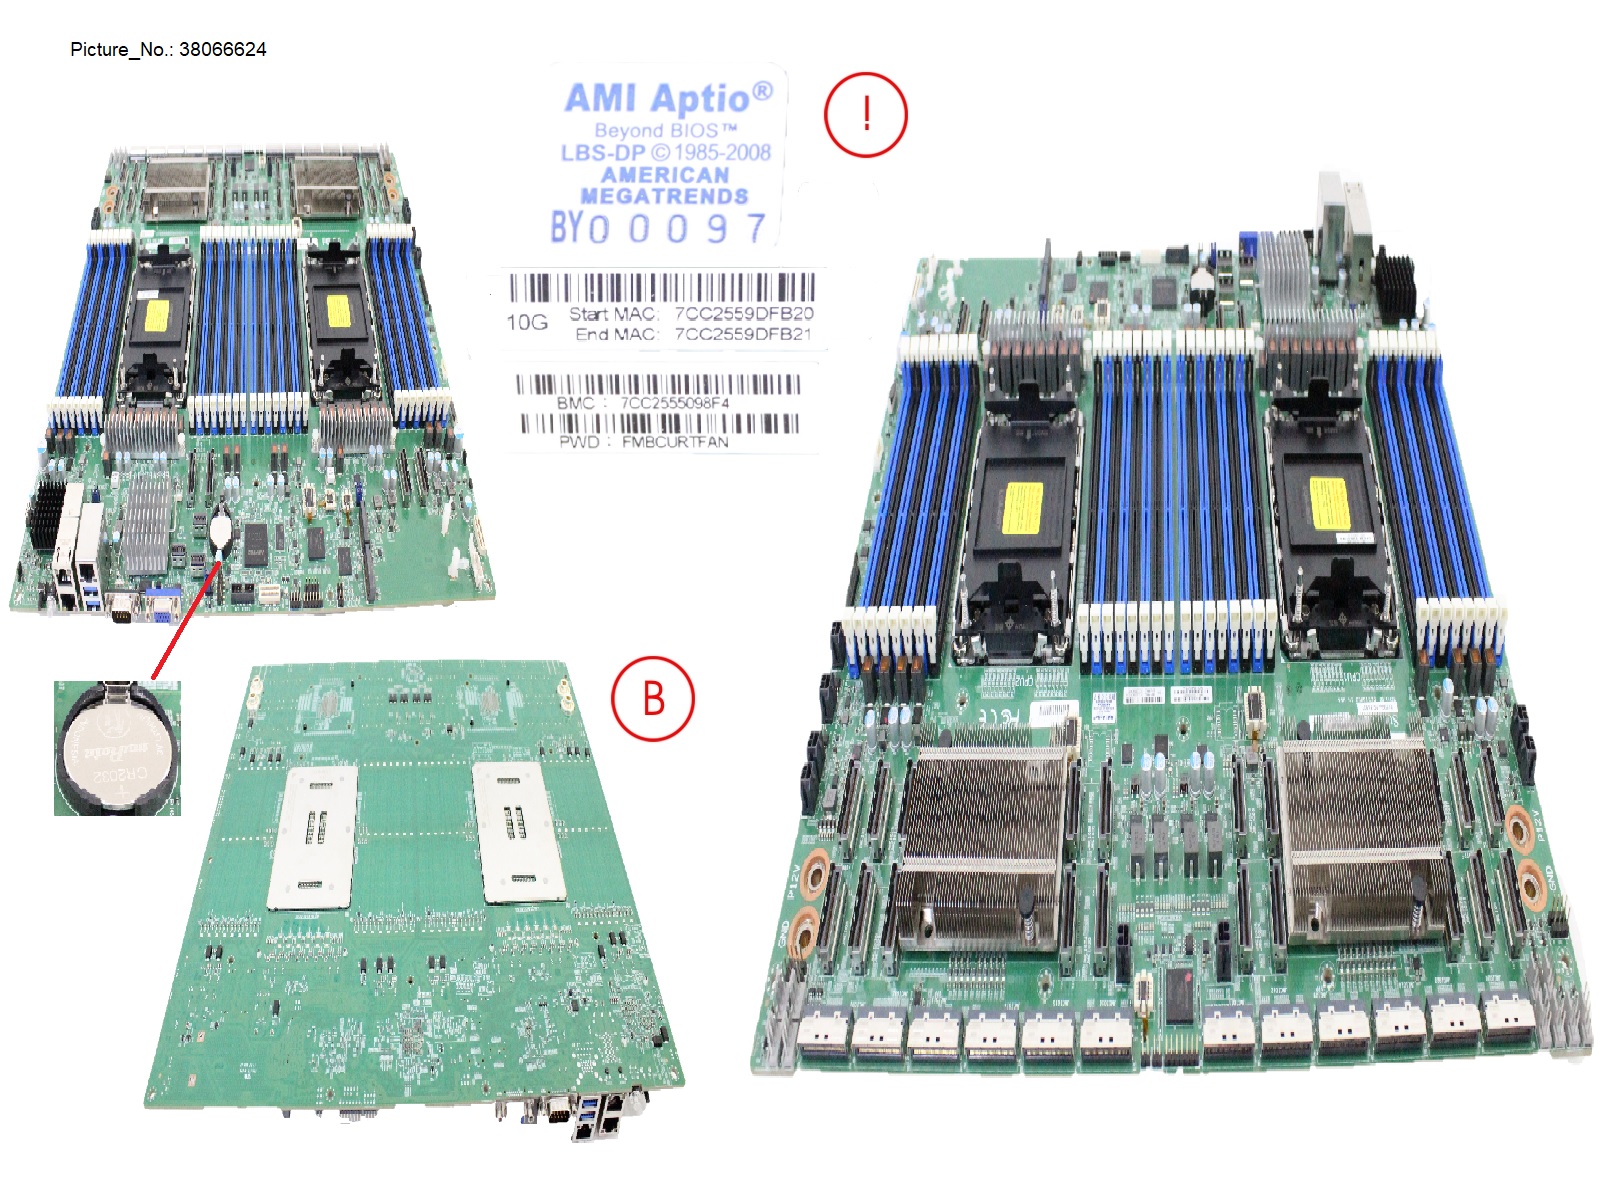 MOTHER BOARD (AIR COOLED)